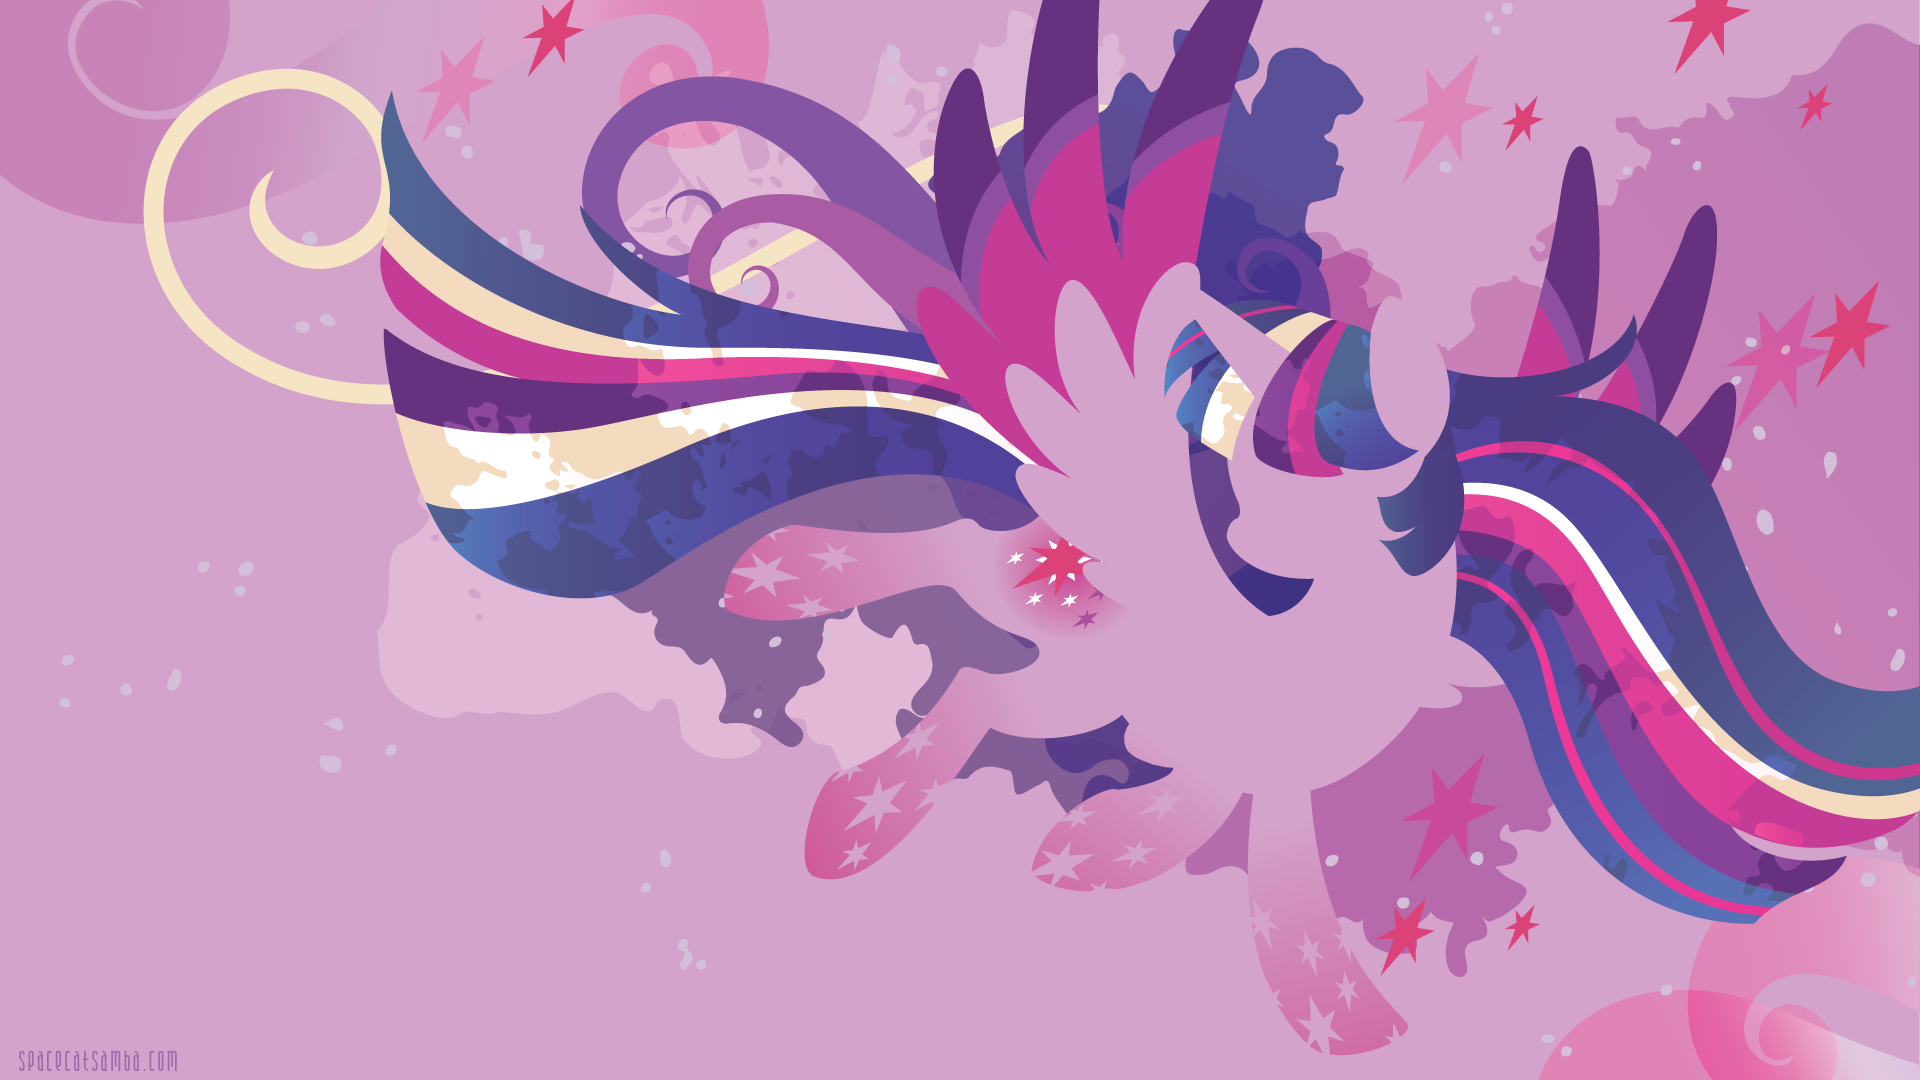 Rainbow Power Twilight Sparkle Silhouette Wall. My little pony twilight, My little pony wallpaper, My little pony picture